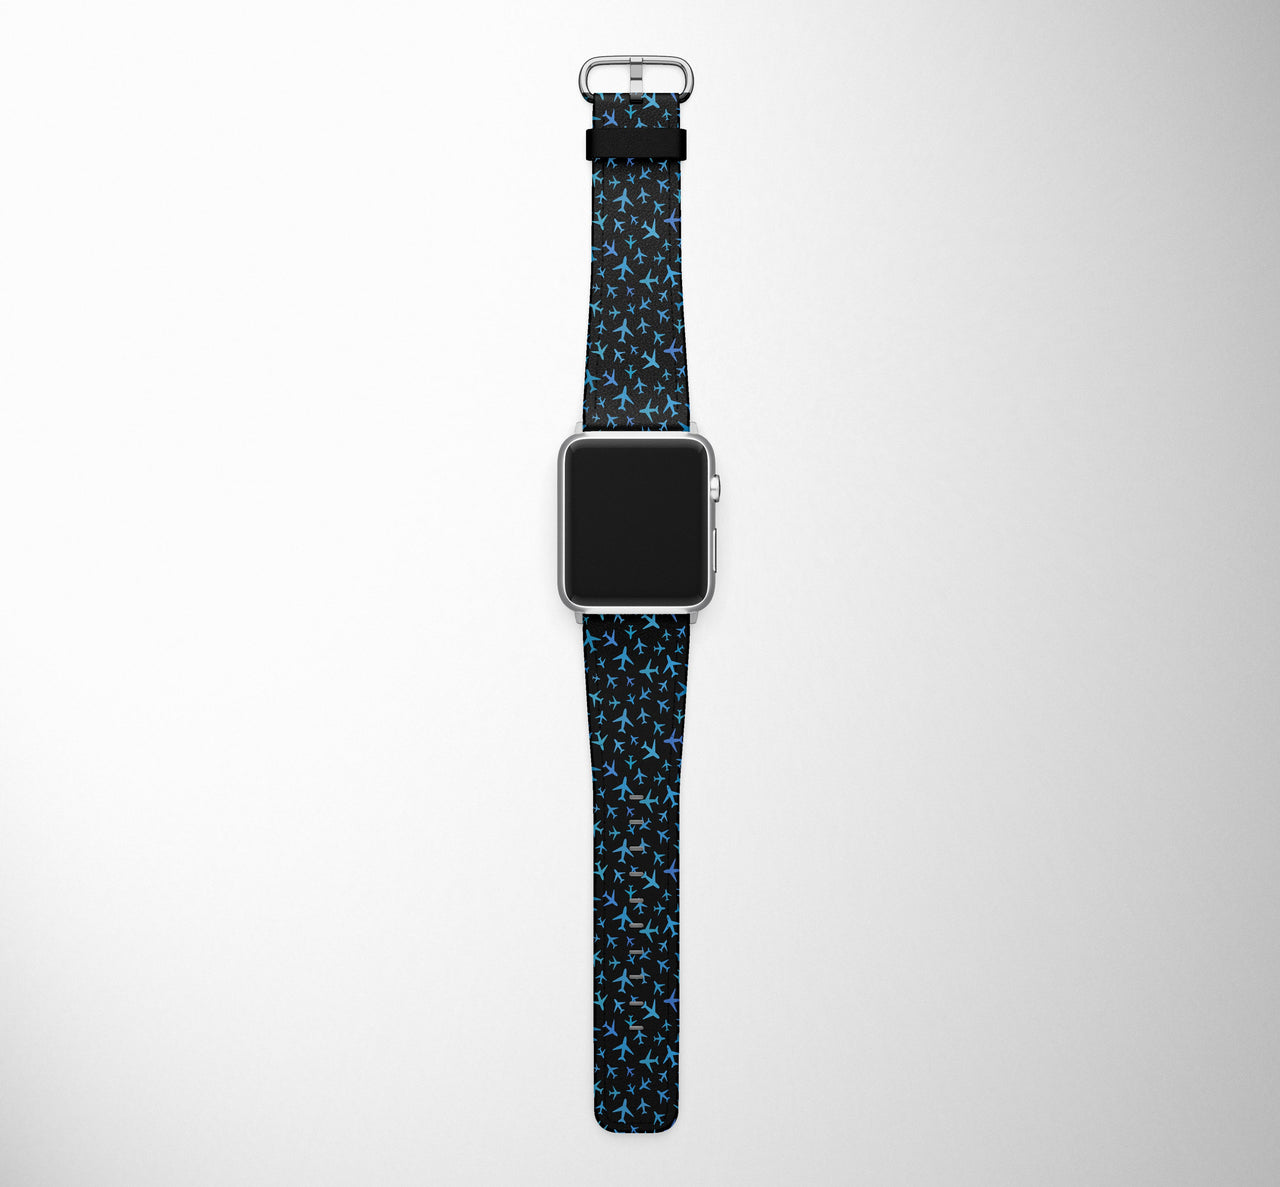 Many Airplanes Black Designed Leather Apple Watch Straps